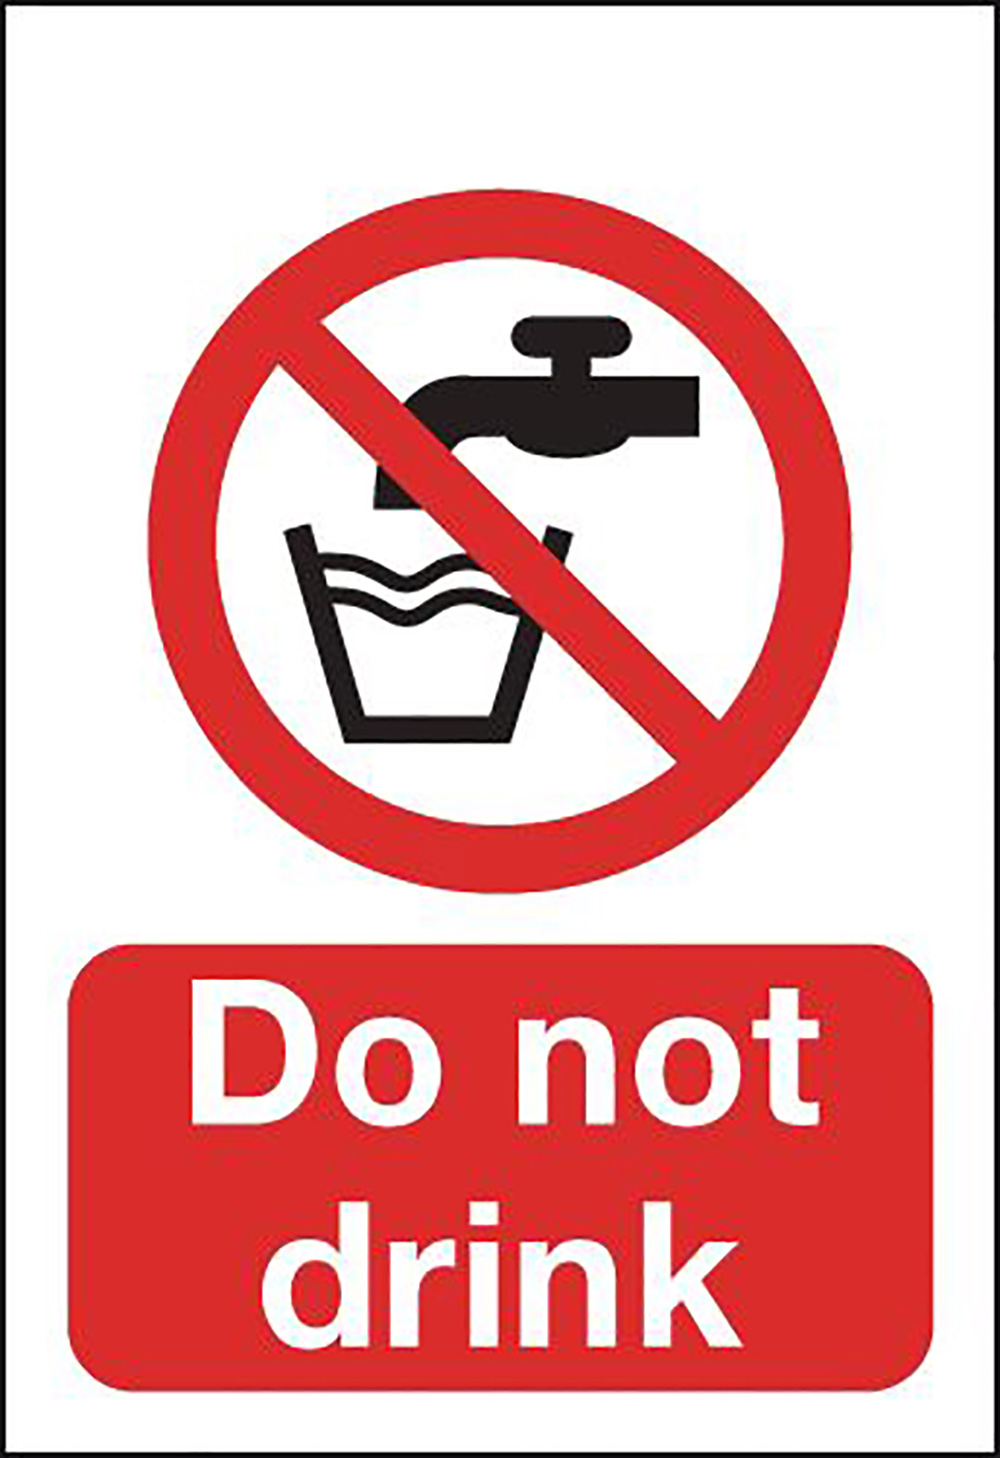 Do Not Drink  297x210mm Self Adhesive Vinyl Safety Sign  